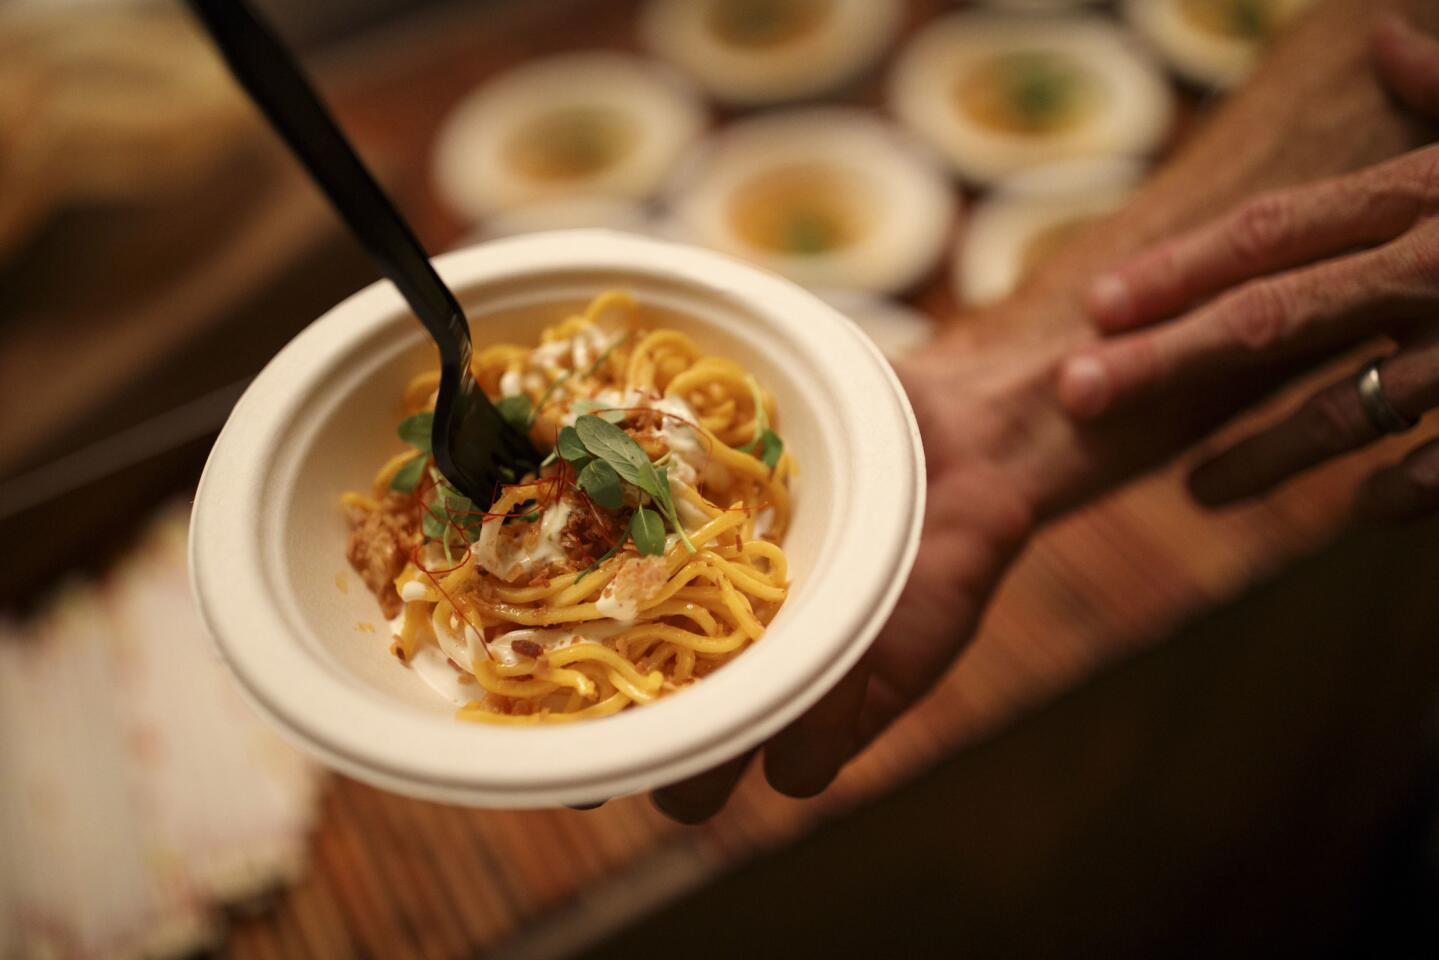 Bourbon Steak serves Palabok noodles, made with egg noodles, crab butter, "XO" crumble, Yuzu aioli, chili herbs and chicharron, at The Taste.